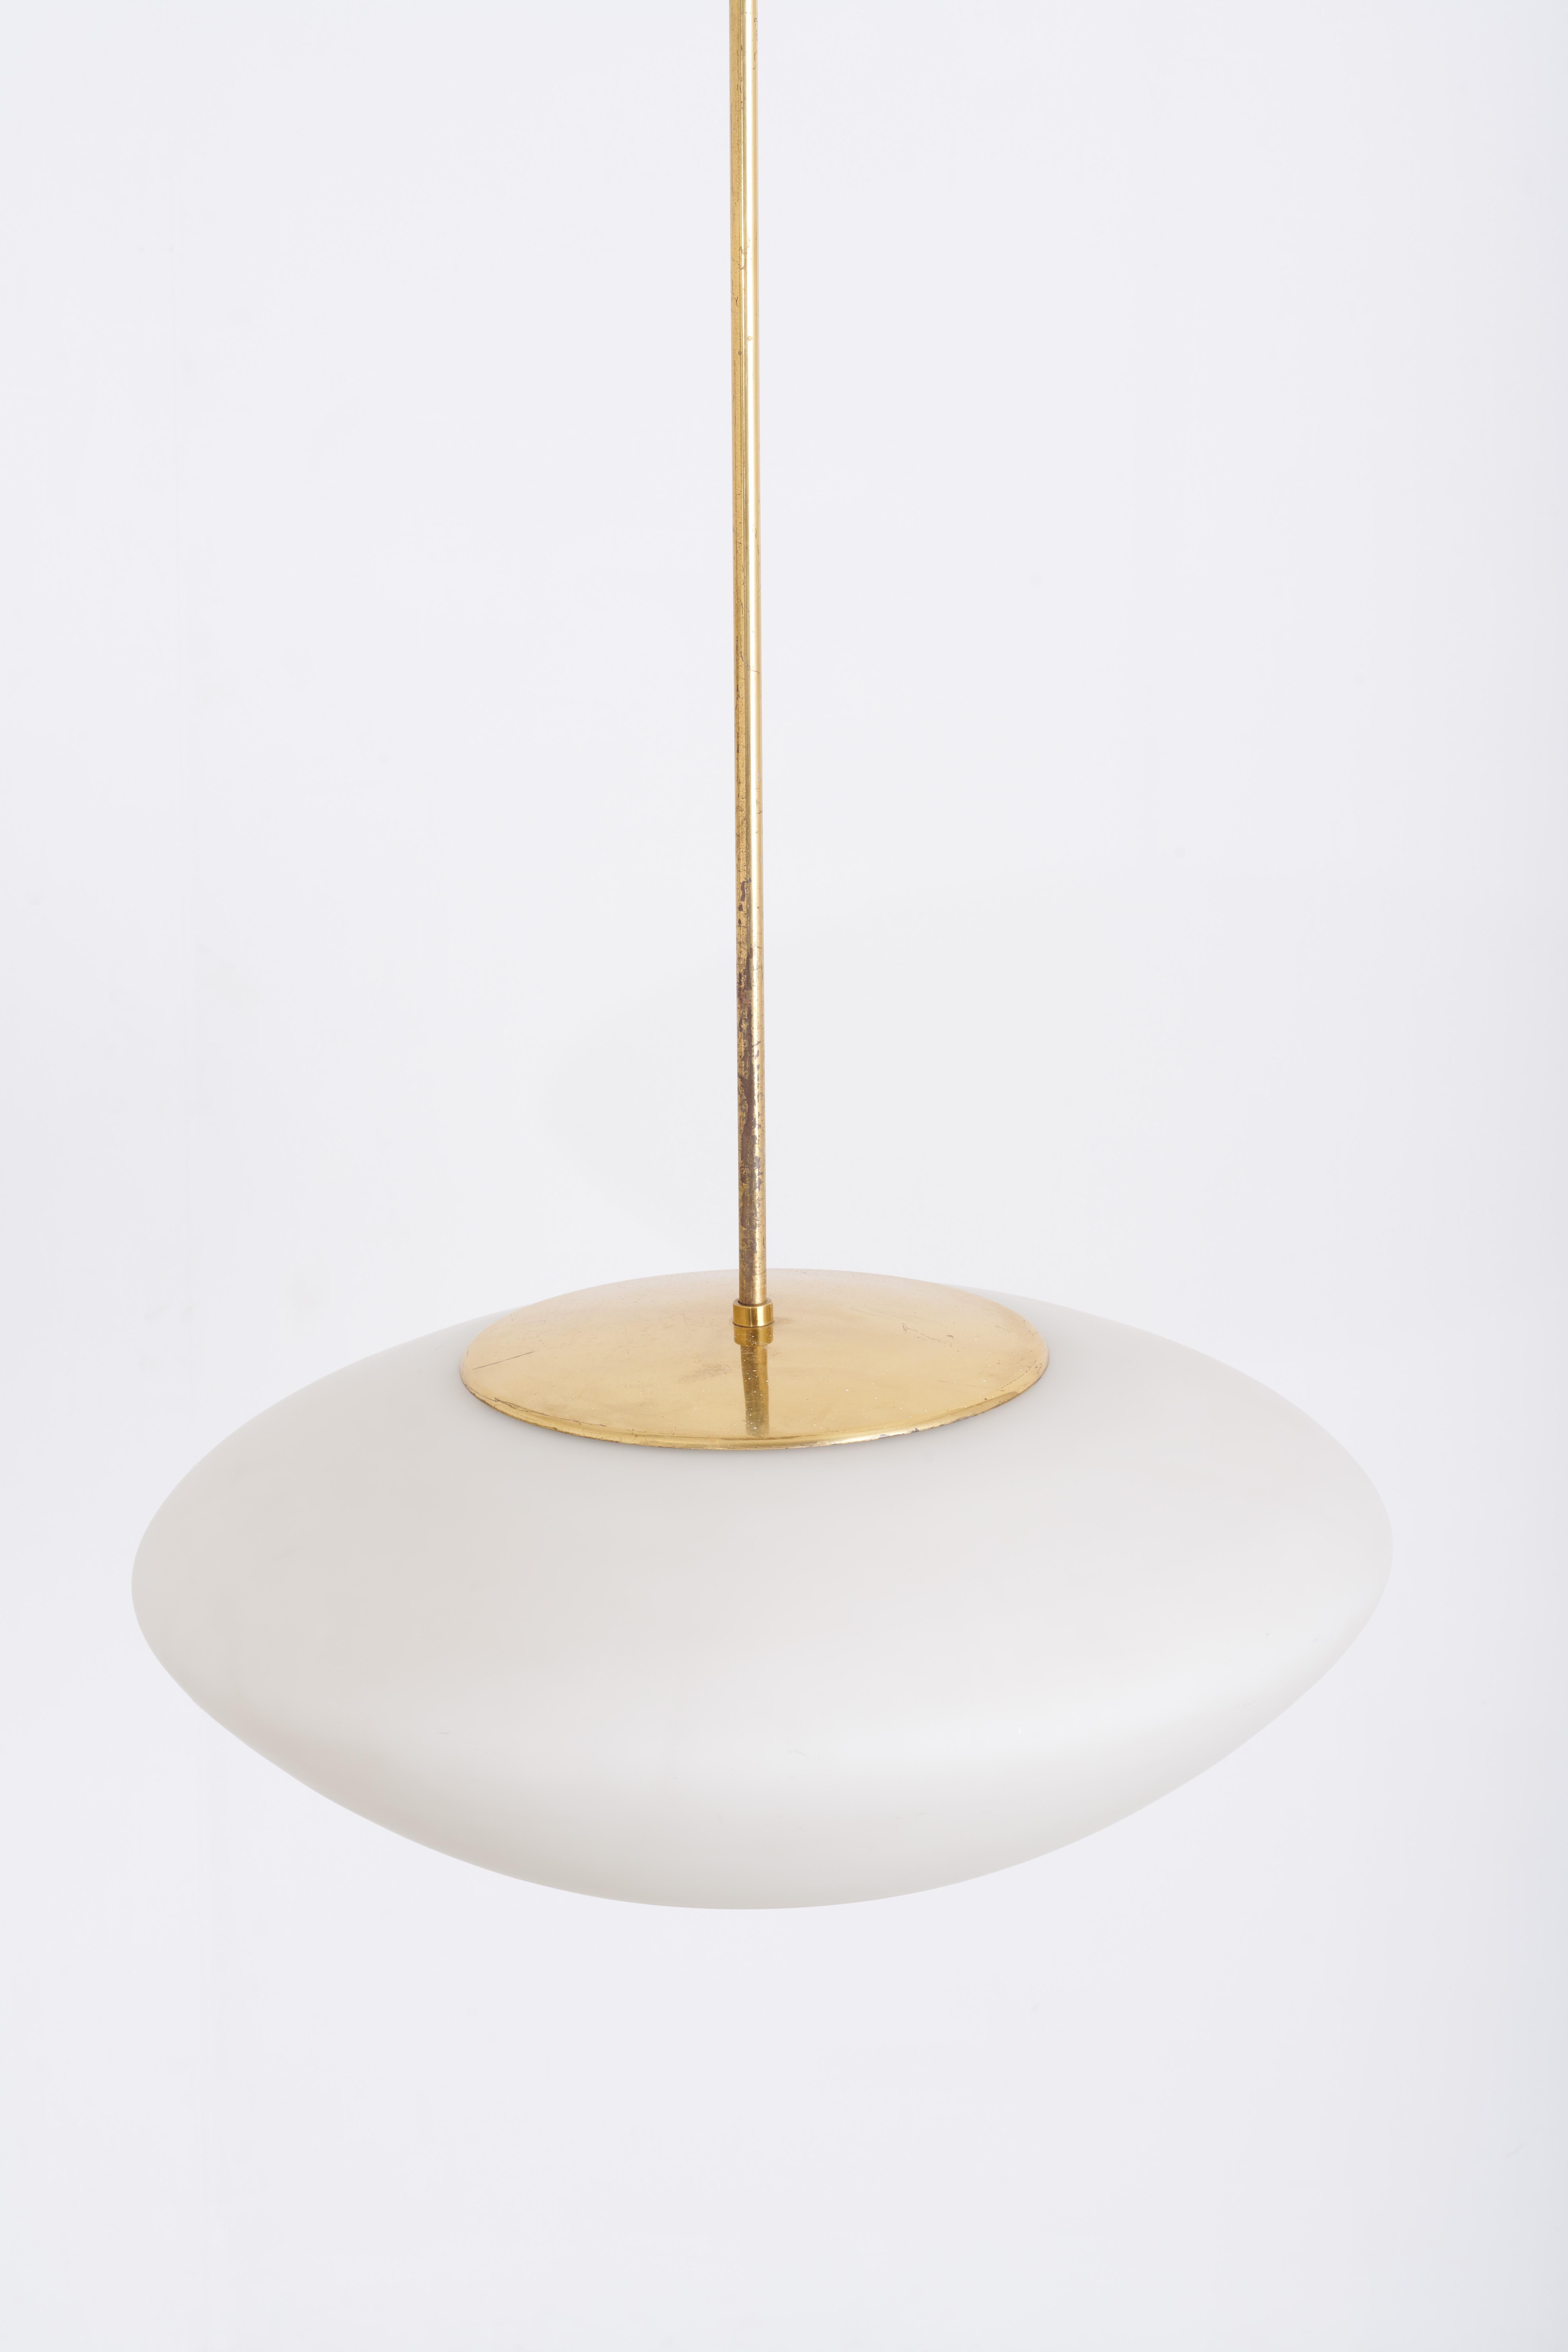 Mid-20th Century Lisa Johansson Pape-Ceiling lamp brass, opaline glass-Mid 20th Century For Sale